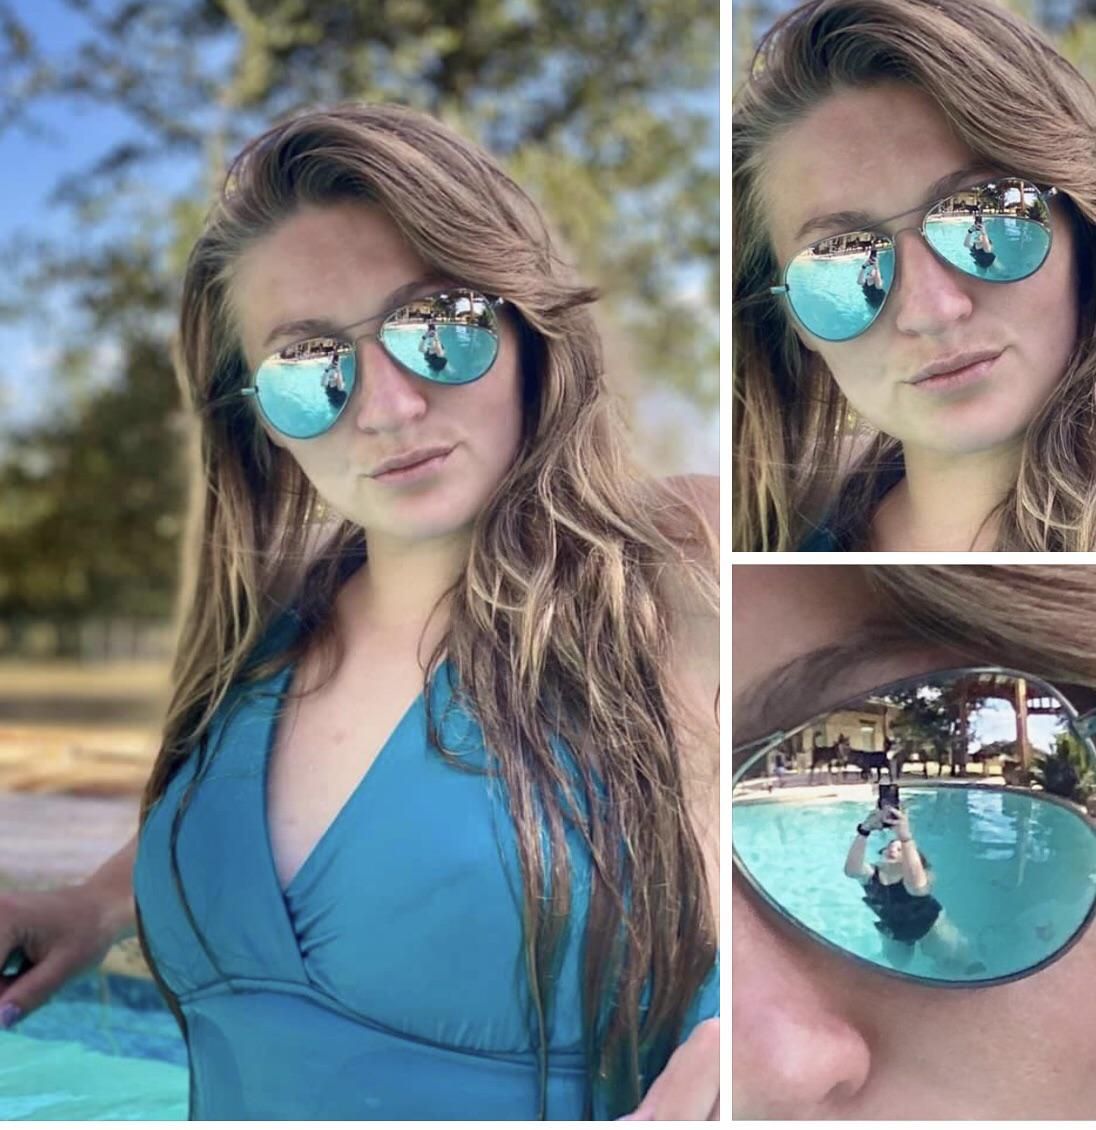 If your friend doesn’t almost drown for the perfect angle, is she really your friend?